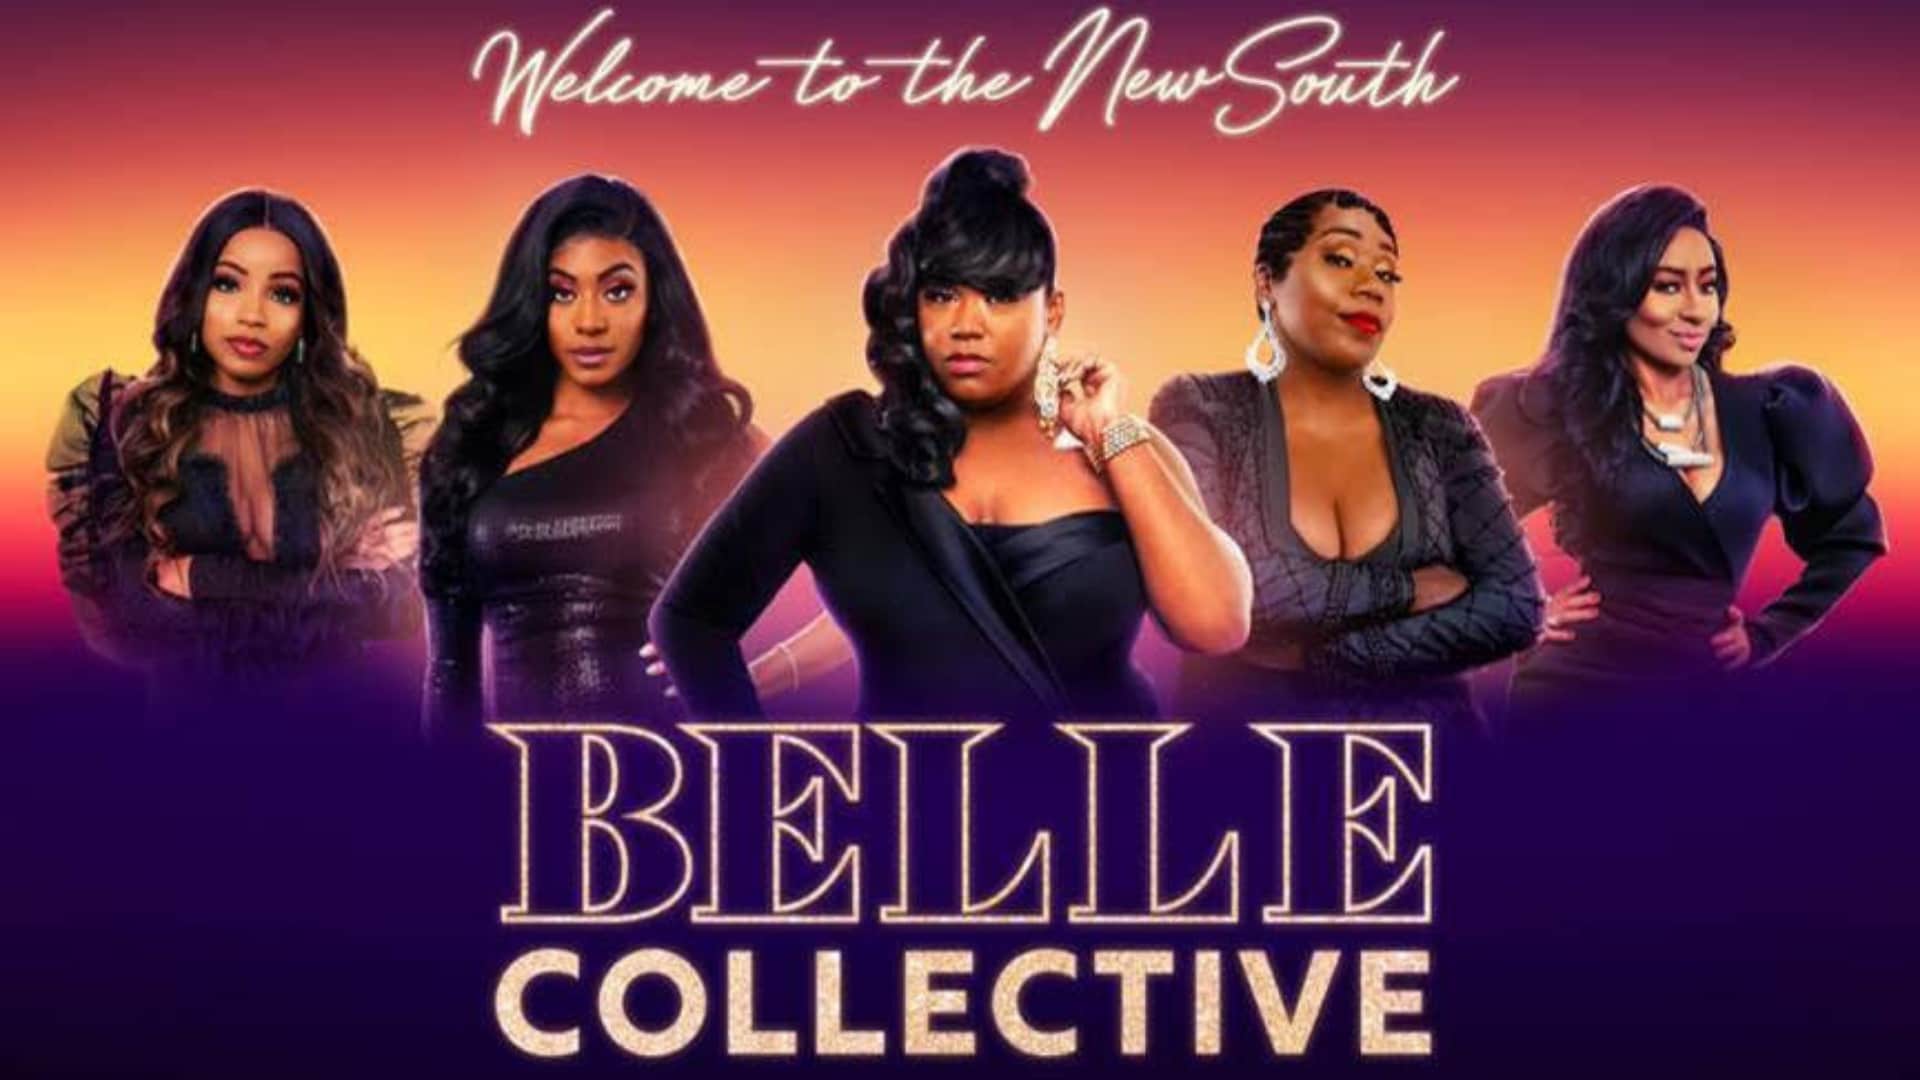 Meeting The Cast Of Own’s New Reality Series ‘Belle Collective’